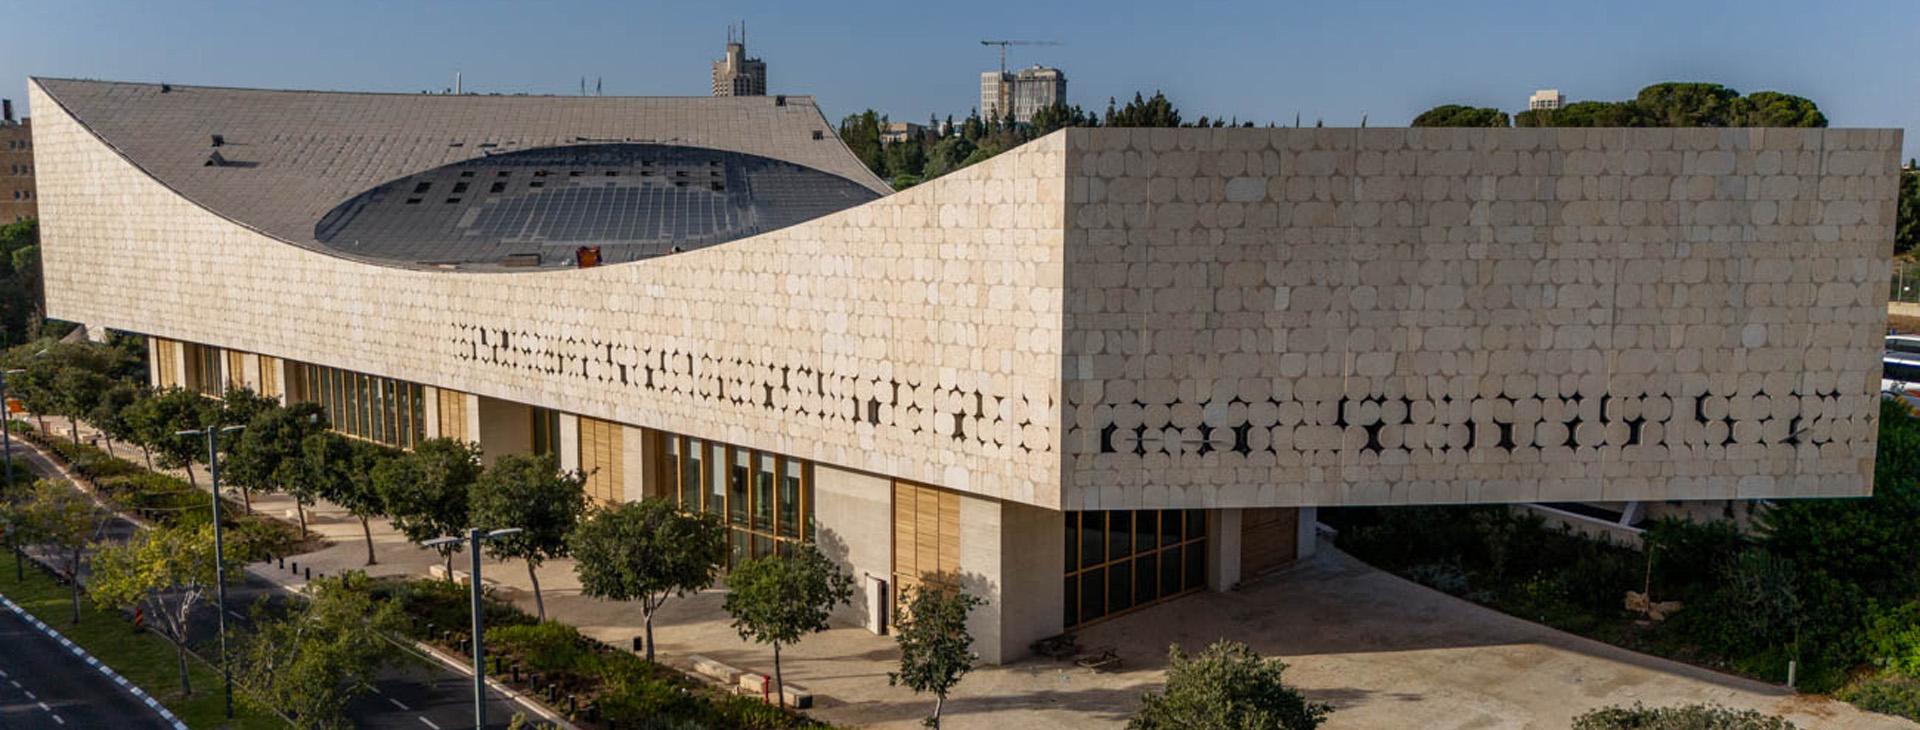 National Library of Israel